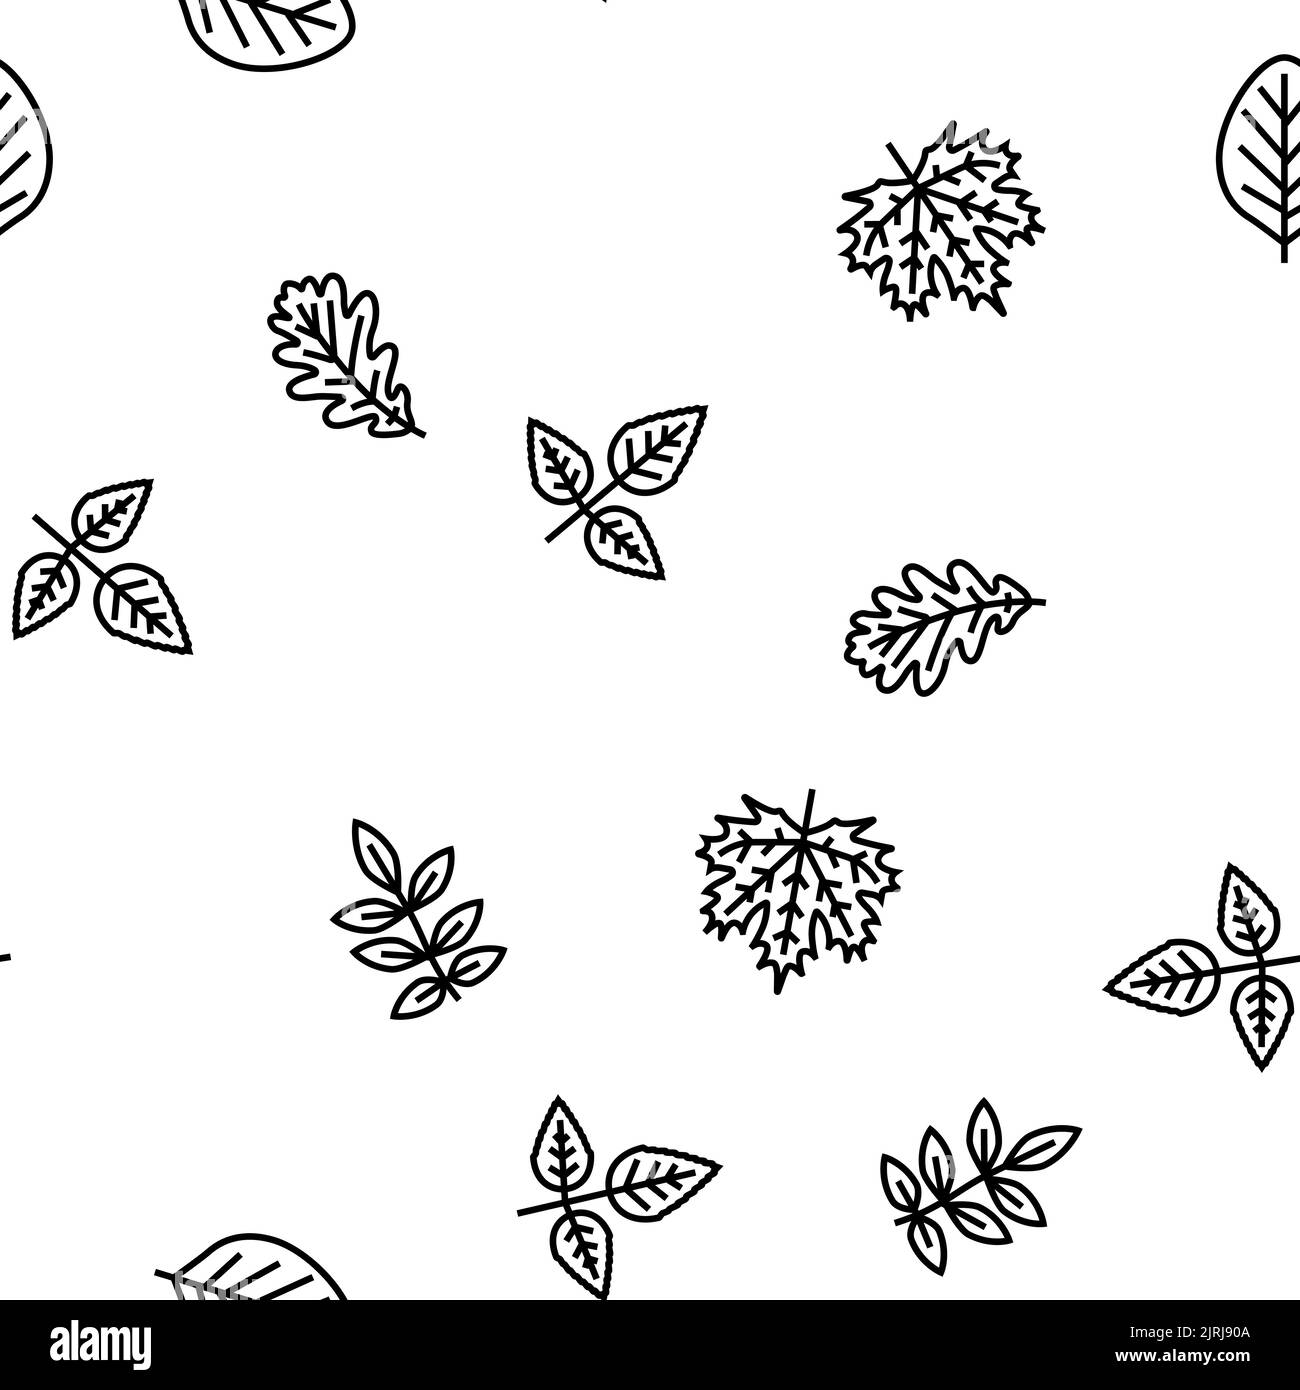 Leaf Of Tree, Bush Or Flower vector seamless pattern Stock Vector